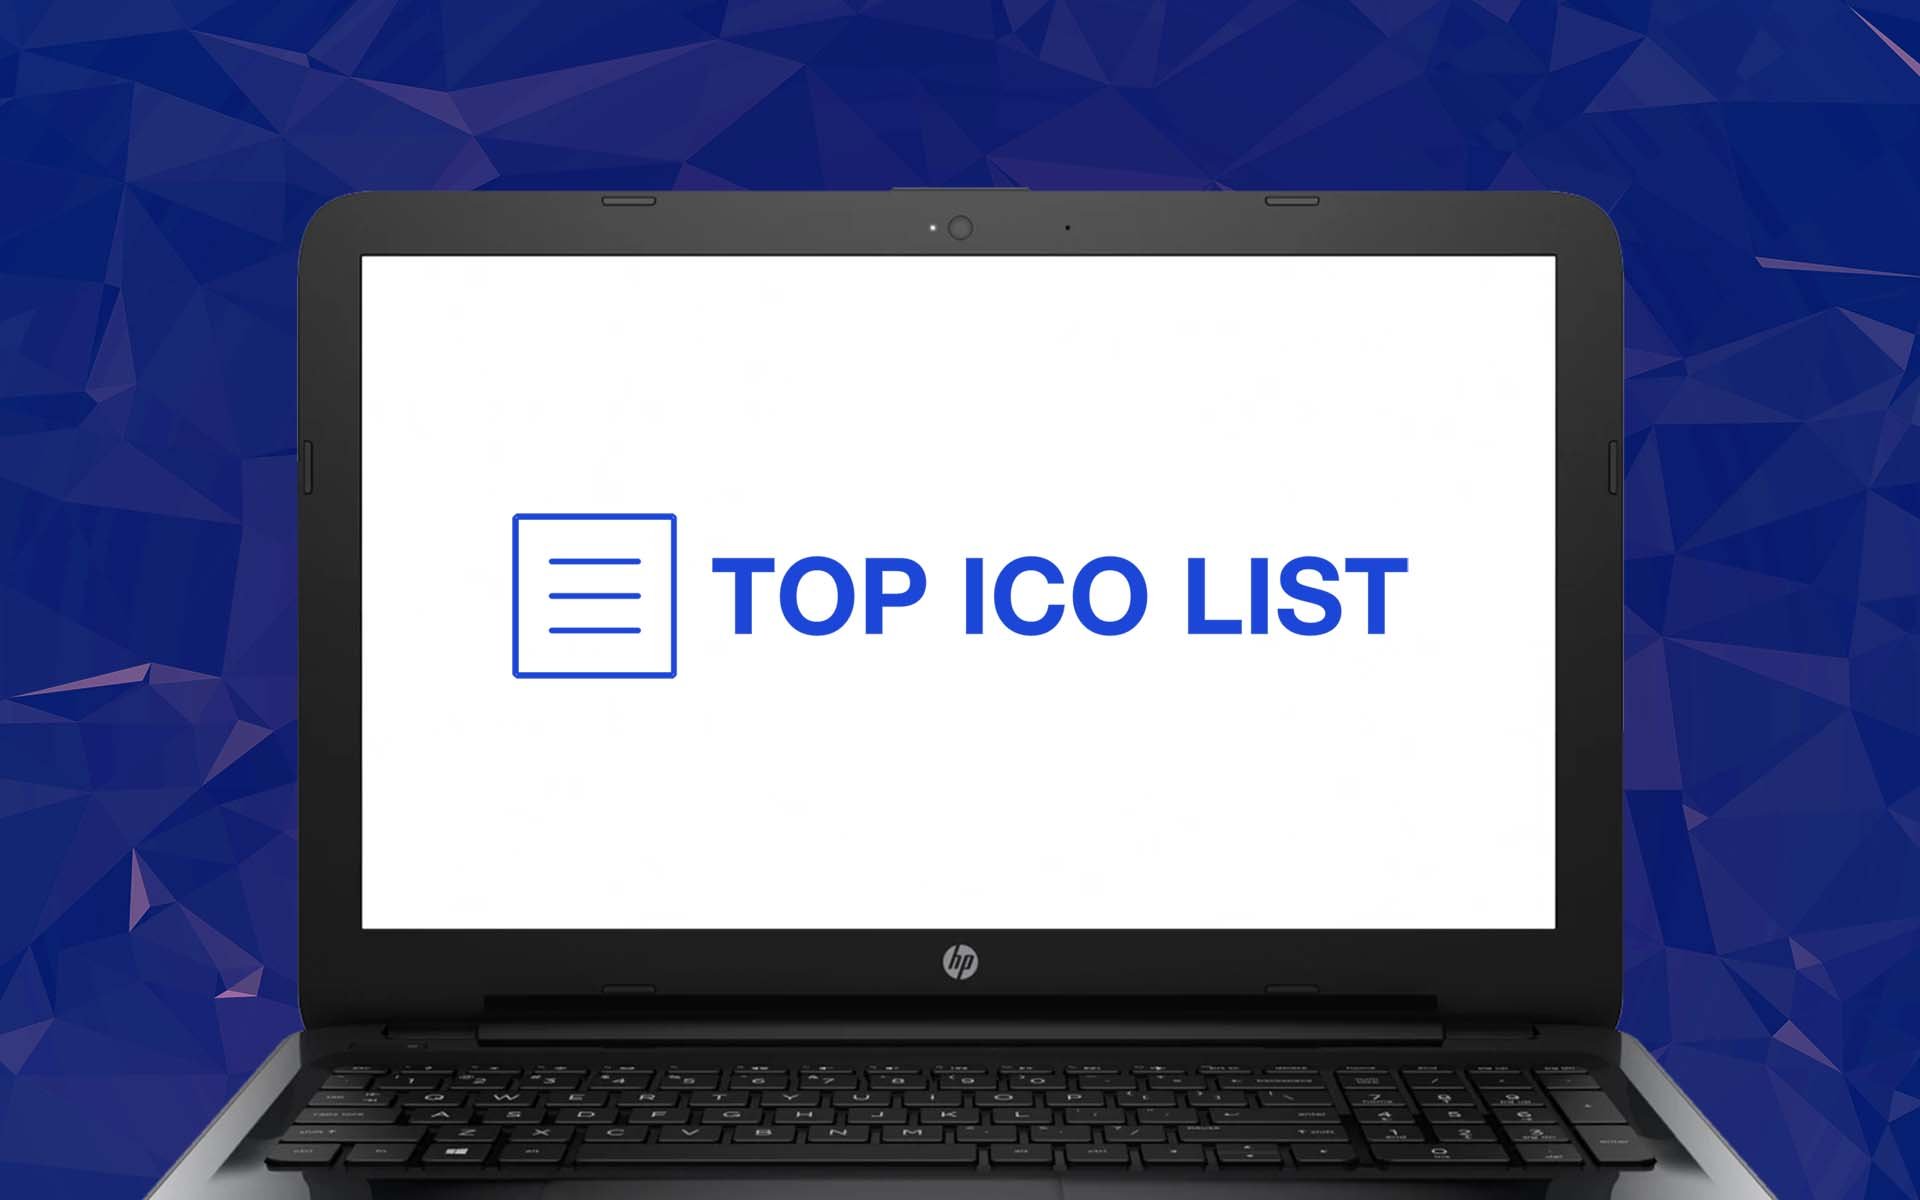 Top ICO List Helps Investors Stay Up to Date on ICOs, Token Sales, and Crypto Crowdsales